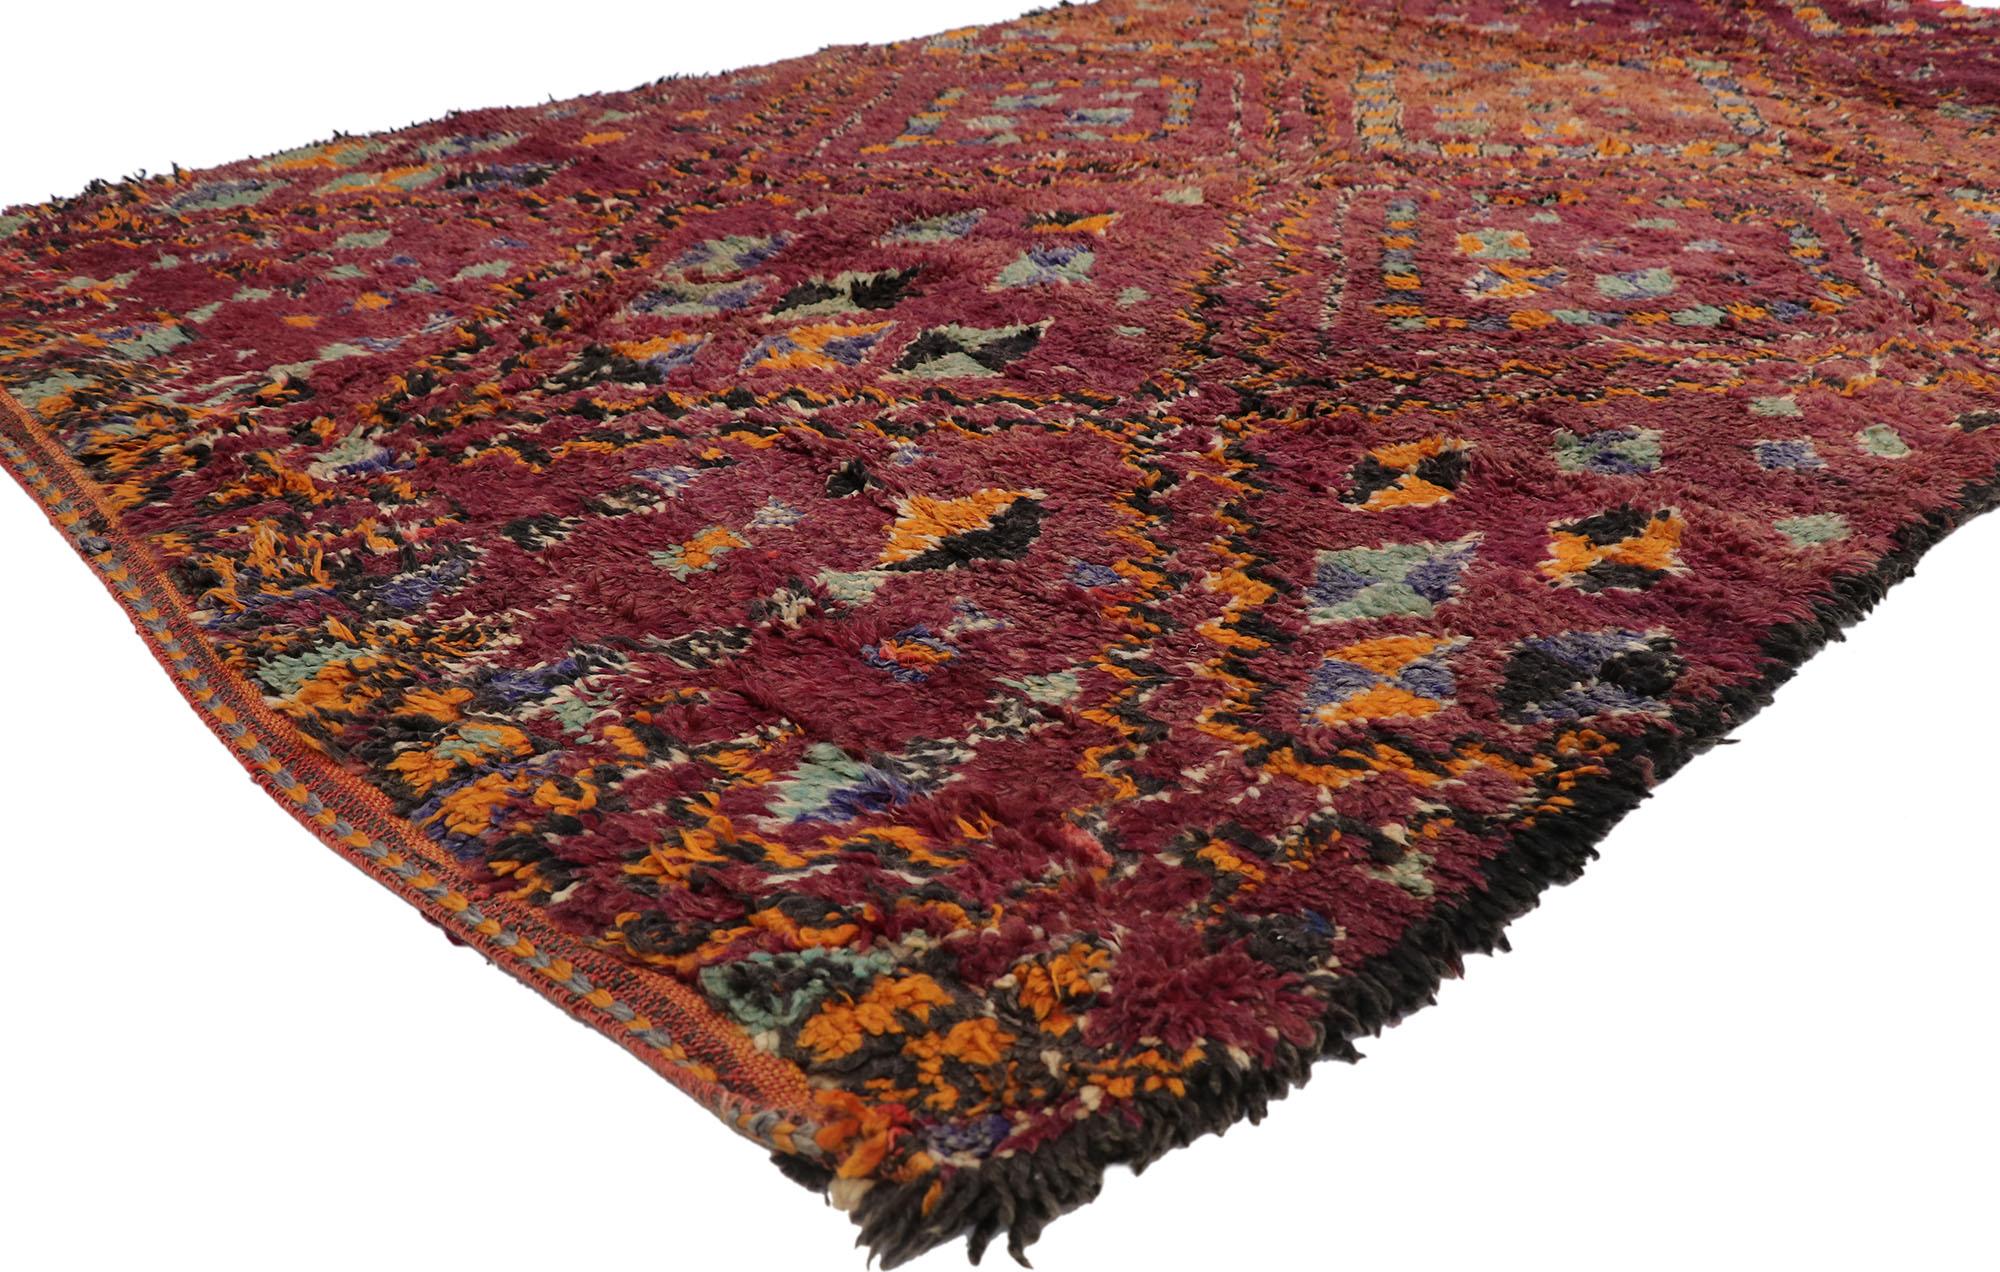 21244 Vintage Beni MGuild Moroccan Rug, 06'03 x 11'00.
Showcasing a bold expressive design, incredible detail and texture, this hand knotted wool vintage Berber Moroccan rug is a captivating vision of woven beauty. The eye-catching diamond pattern